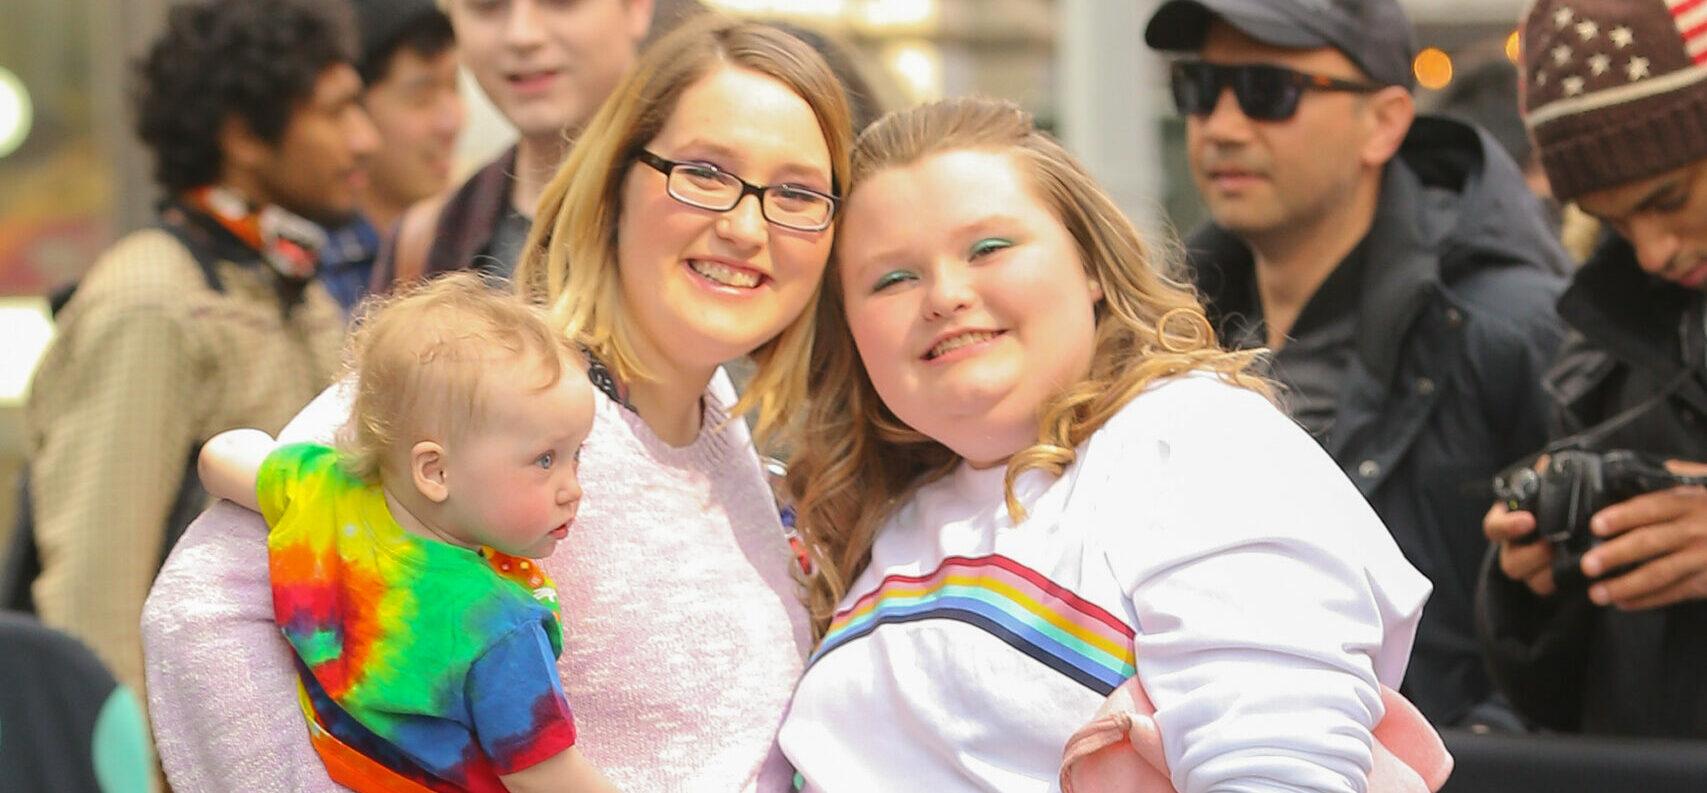 Honey Boo Boo sister Pumpkin and daughter seen leaving the Aol Build studios in NYC